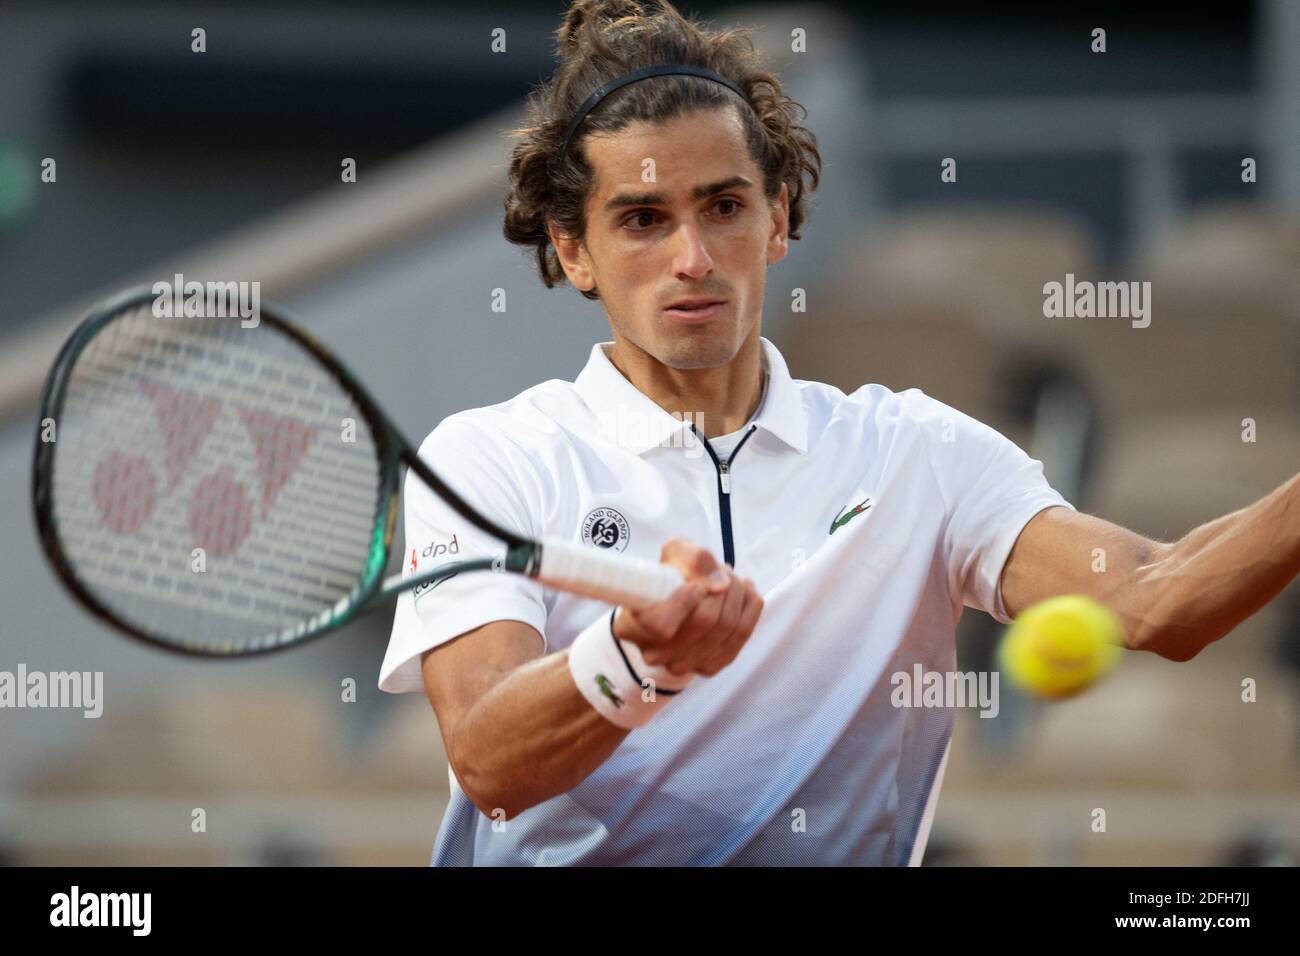 Pierre-Hugues Herbert of France during his match against Alexander Zverev  of Germany in the second round of the French Tennis Open men's singles at  Roland Garros stadium on September 30, 2020 in